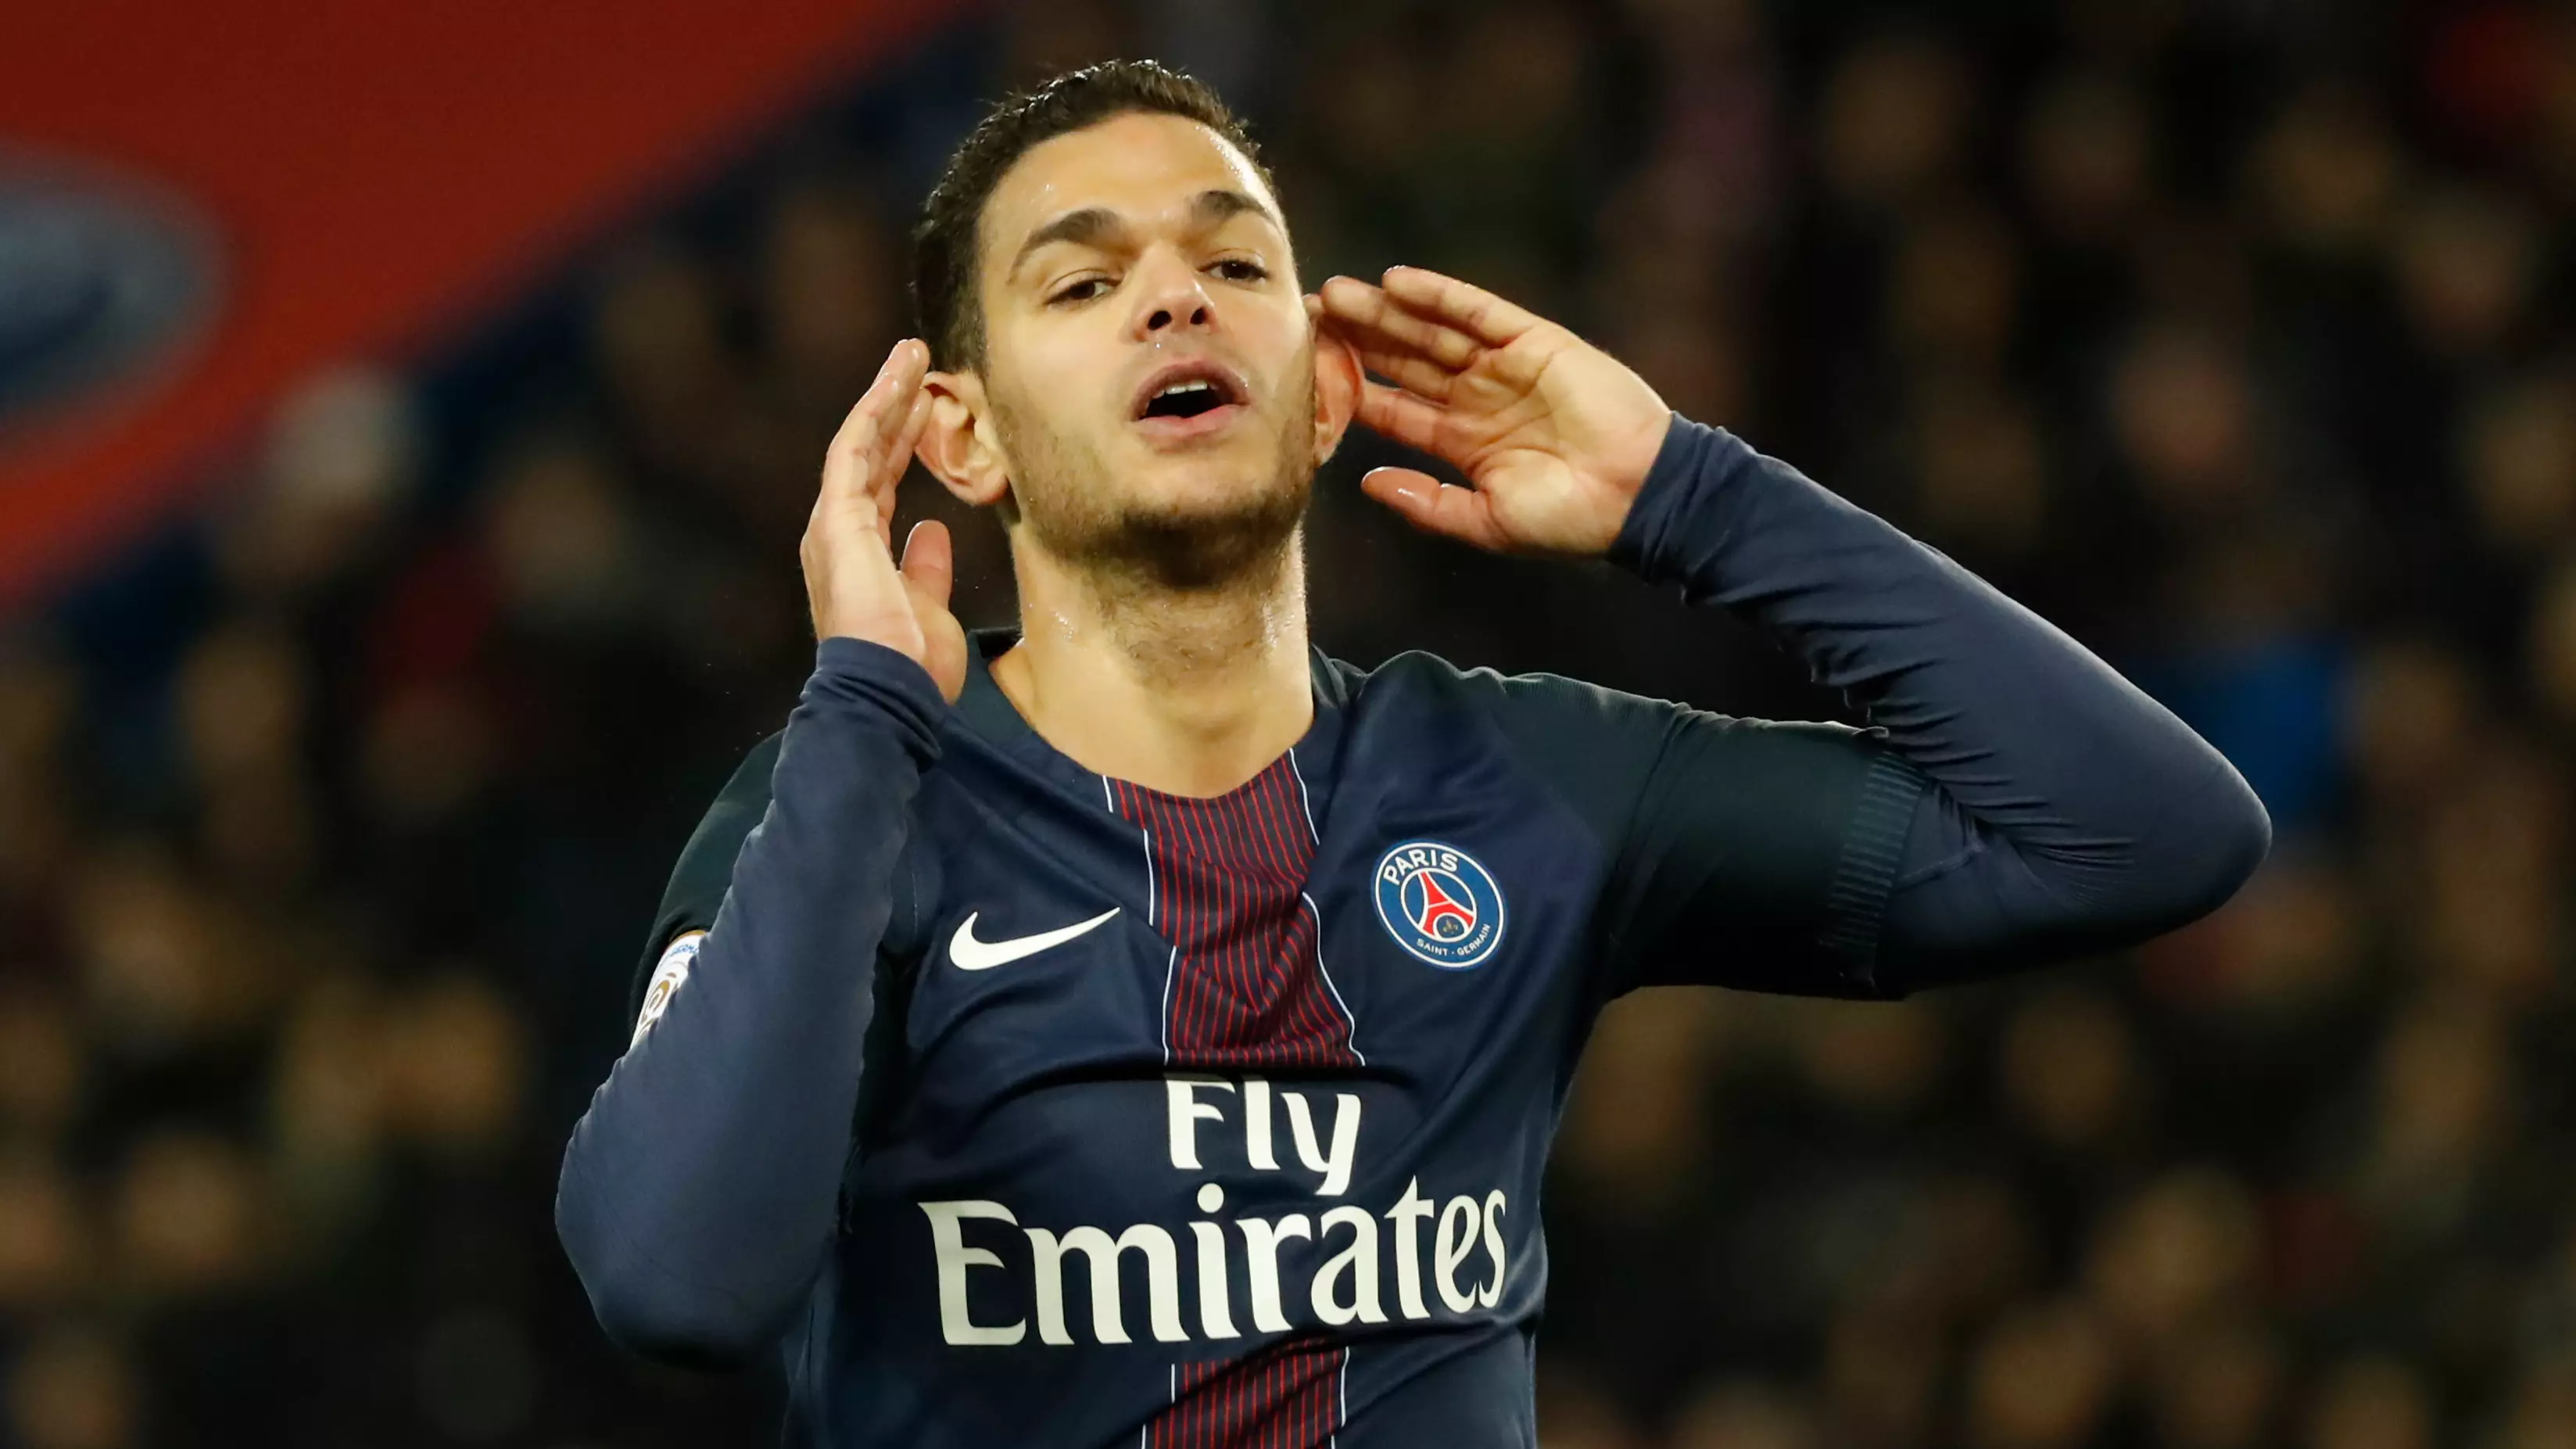 Hatem Ben Arfa Set For The Perfect Move To Get His Career Going Again